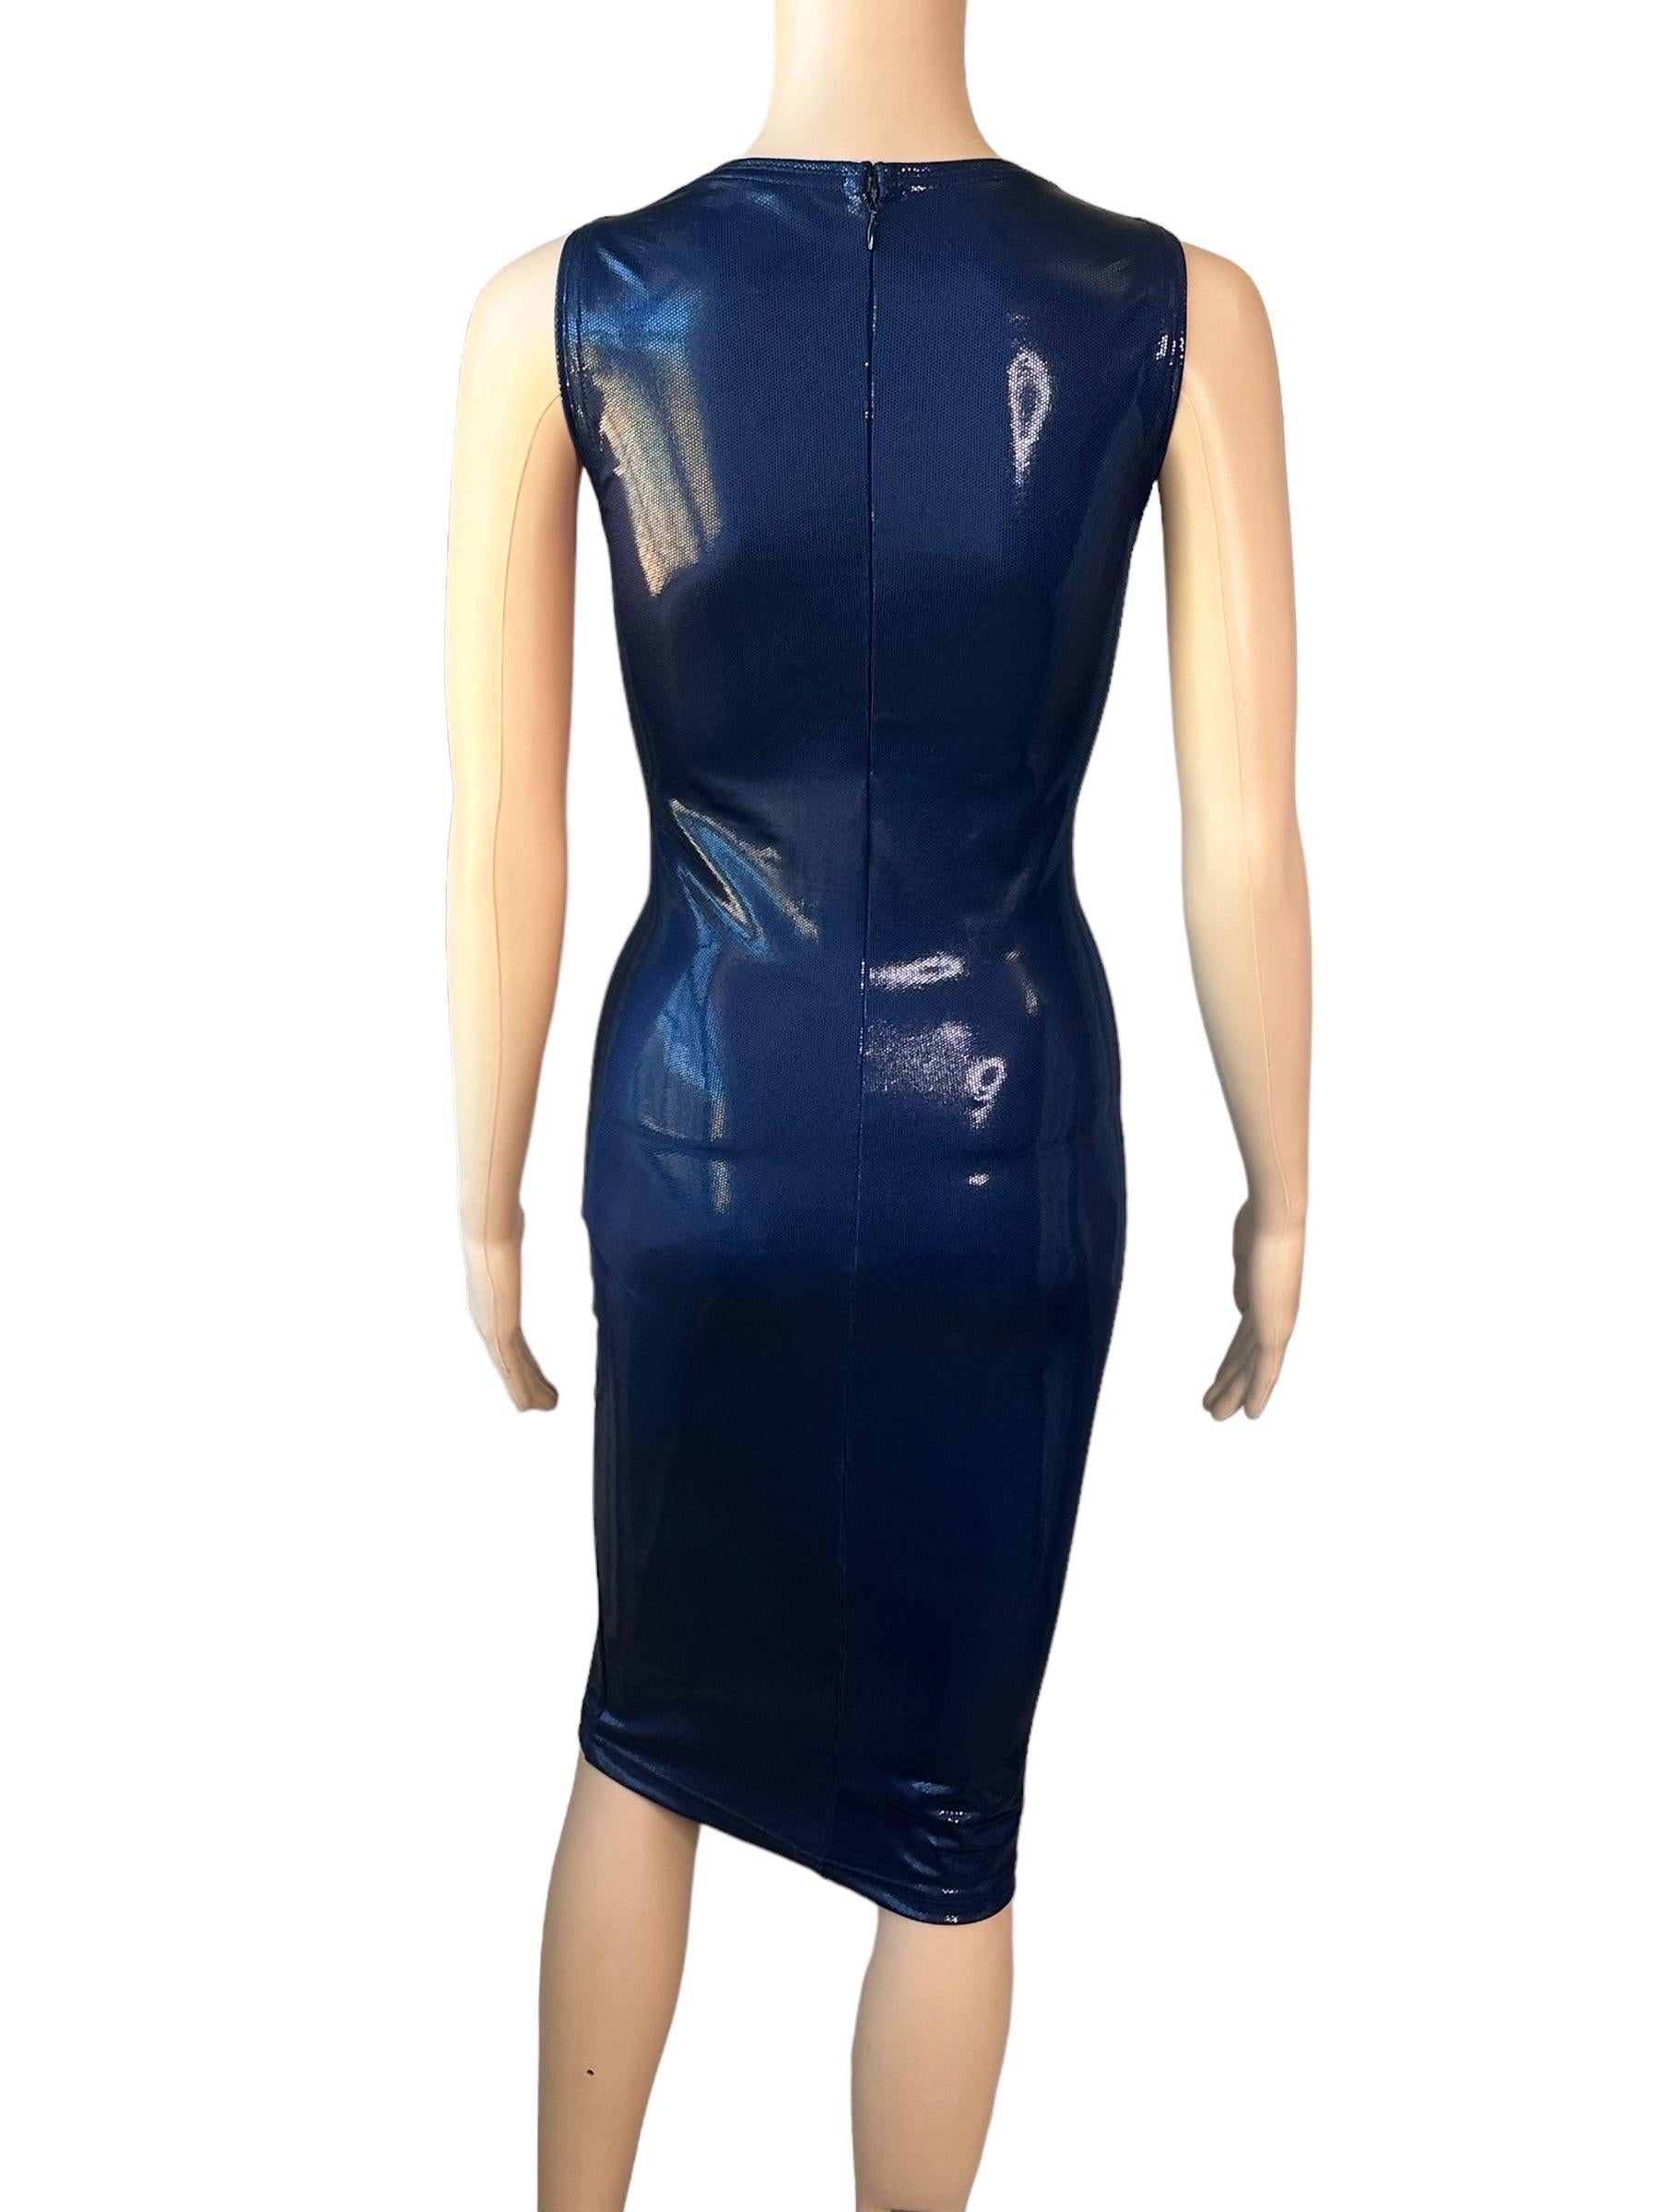 Gianni Versace c. 1994 Vintage Wet Look Stretch Bodycon Navy Blue Midi Dress In Good Condition In Naples, FL